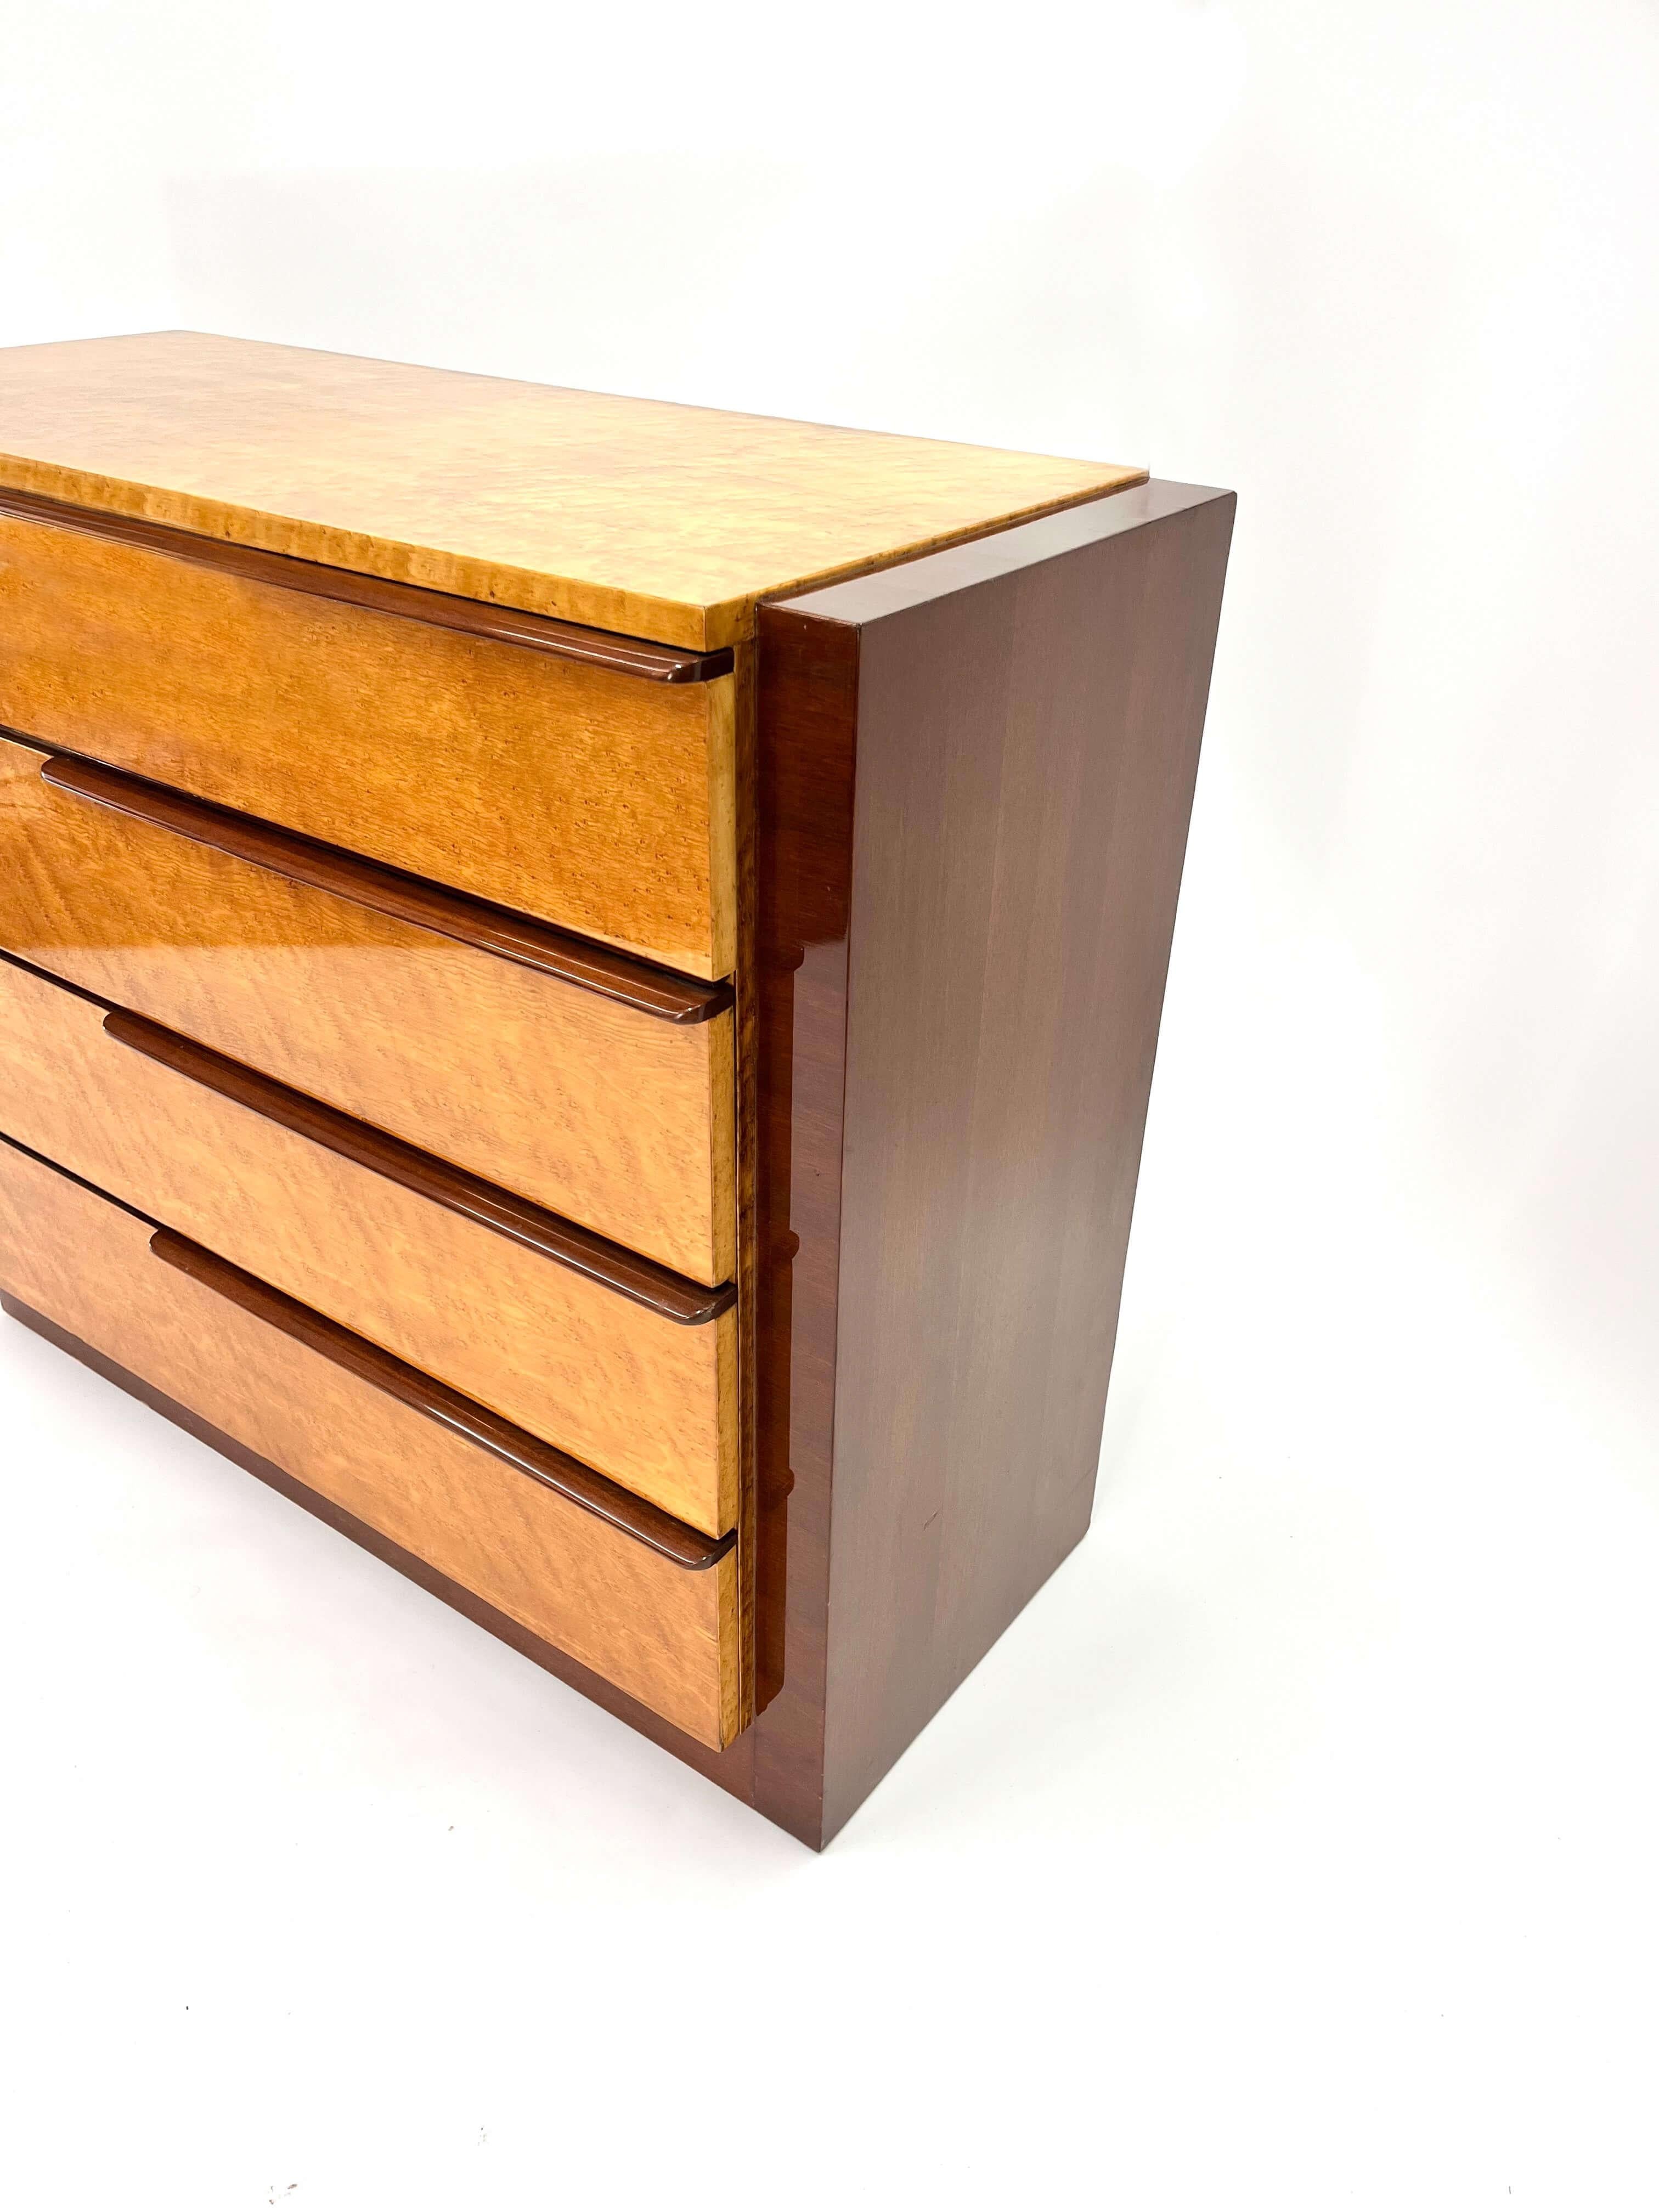 Lacquered Gilbert Rohde Chest of Drawers for Herman Miller in Birdseye Maple and Mahogany